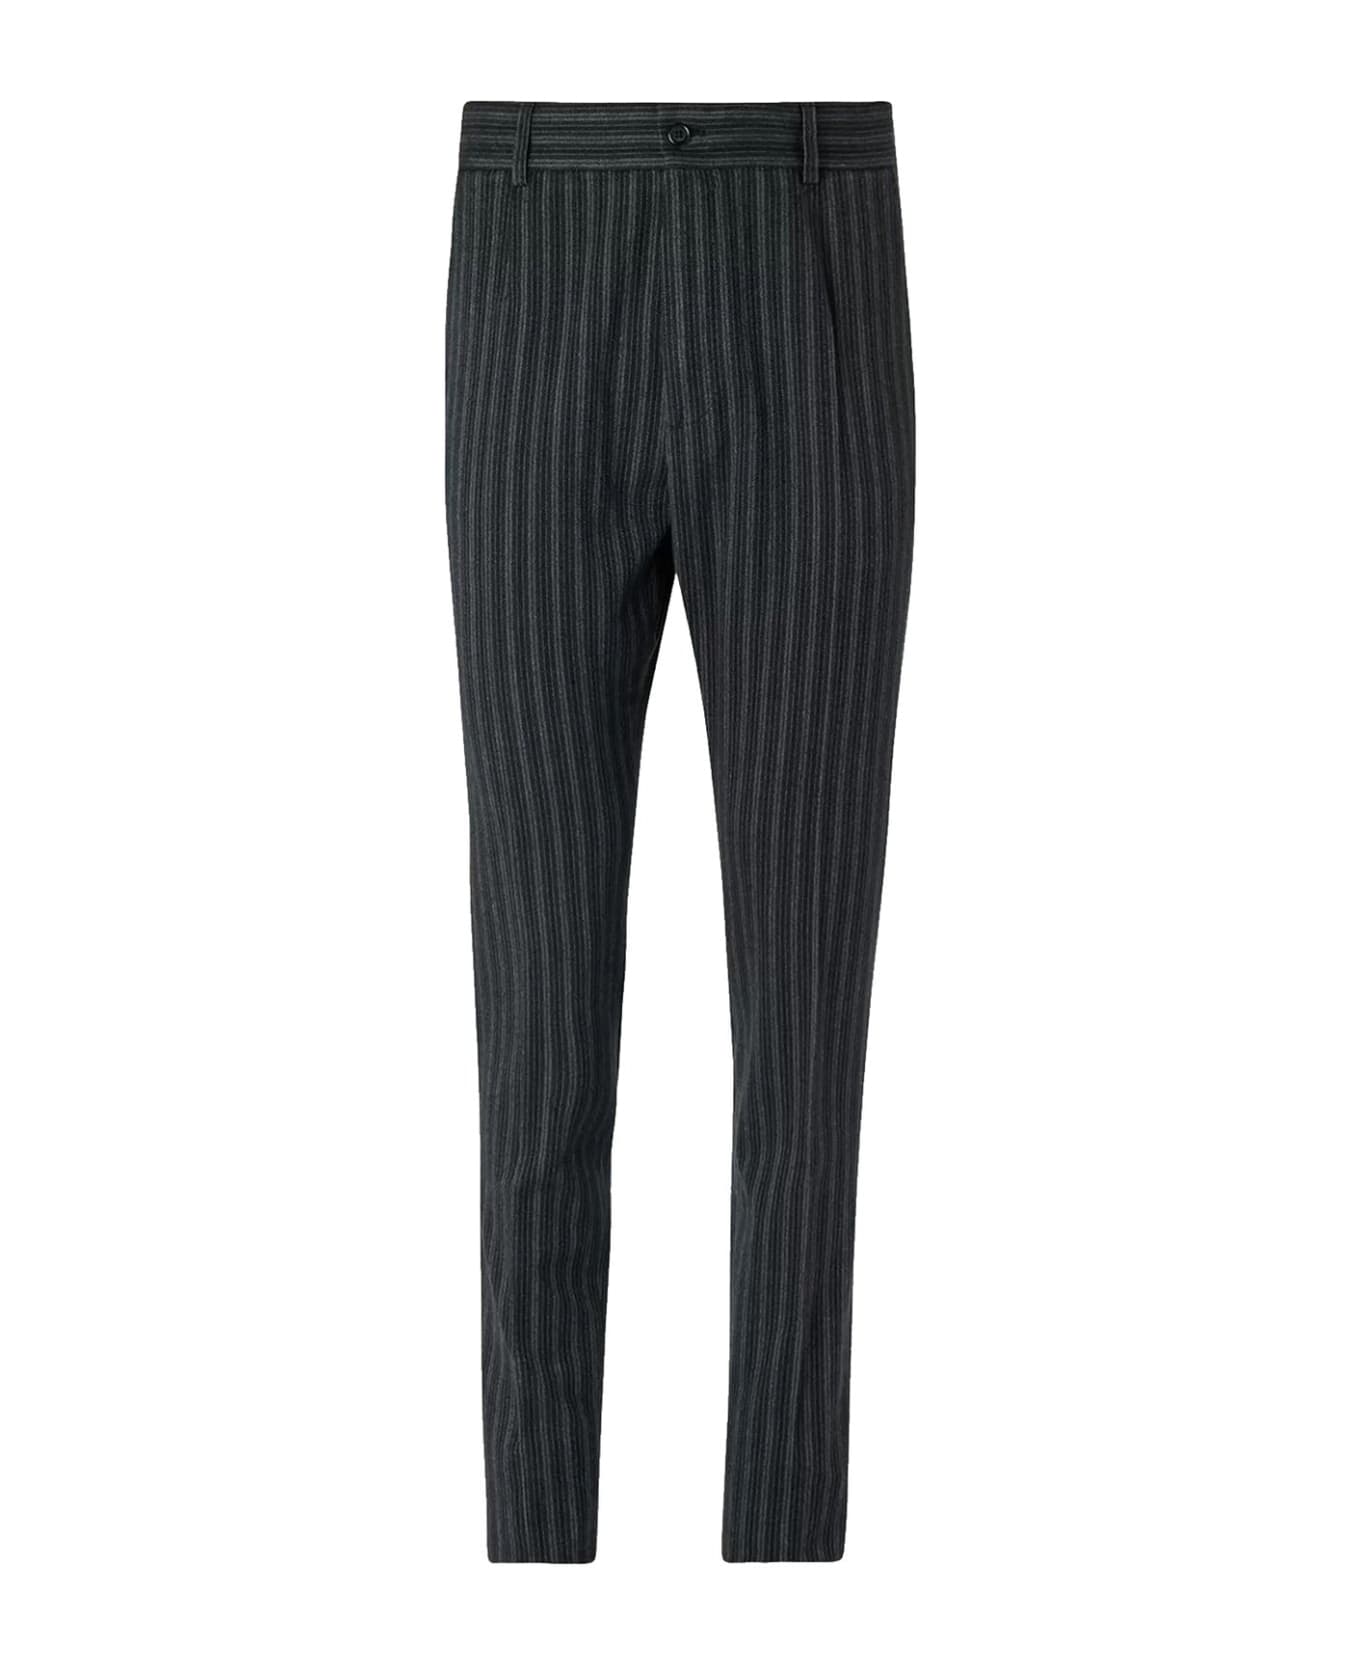 Dolce & Gabbana Tapered Pinstriped Trousers - Gray